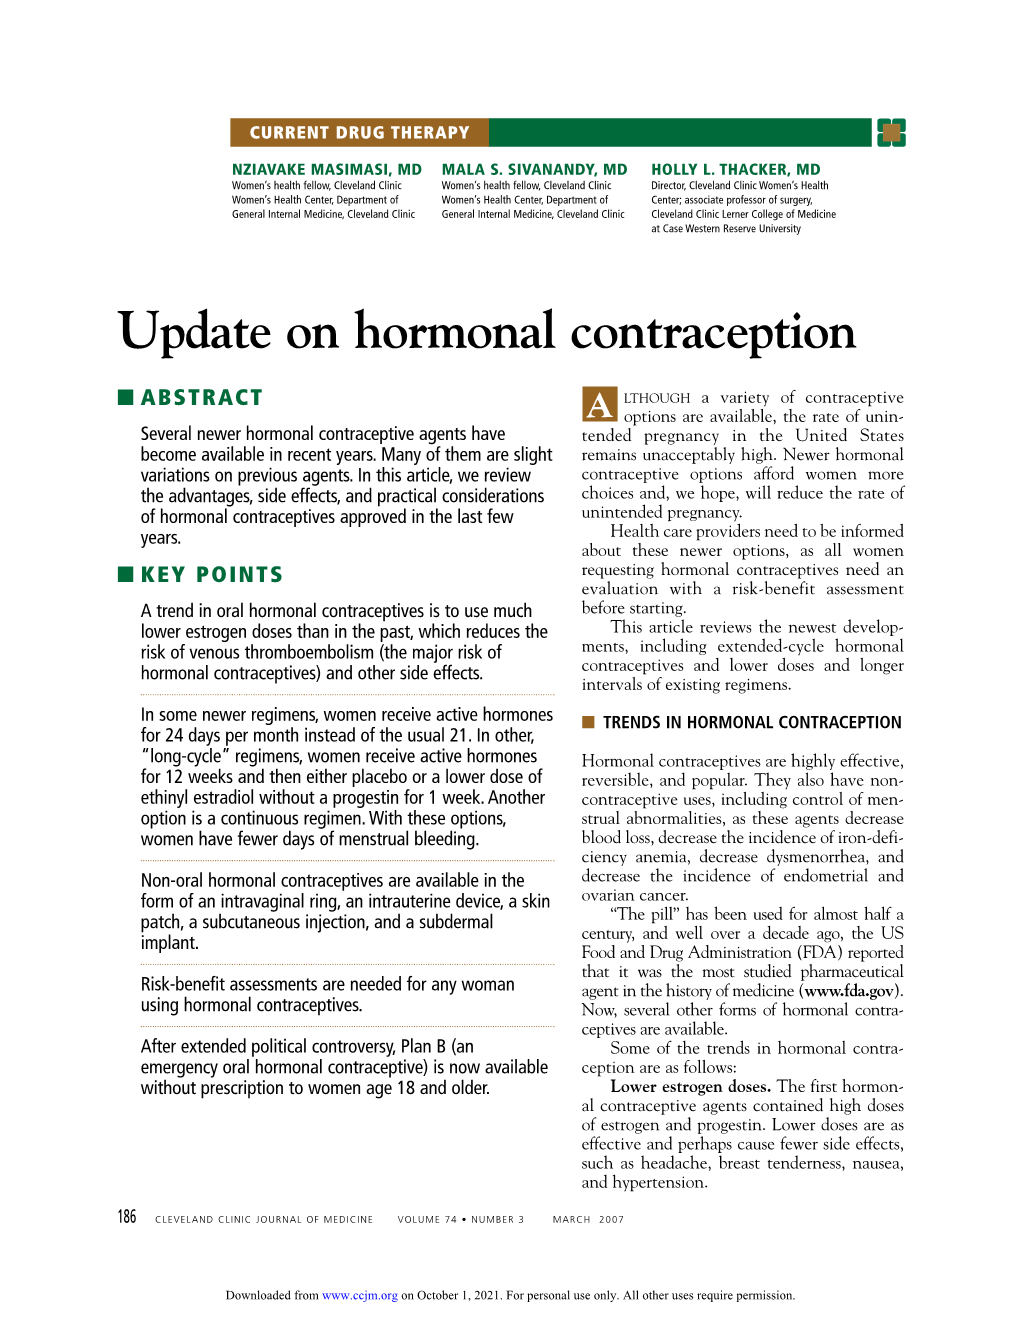 Update on Hormonal Contraception